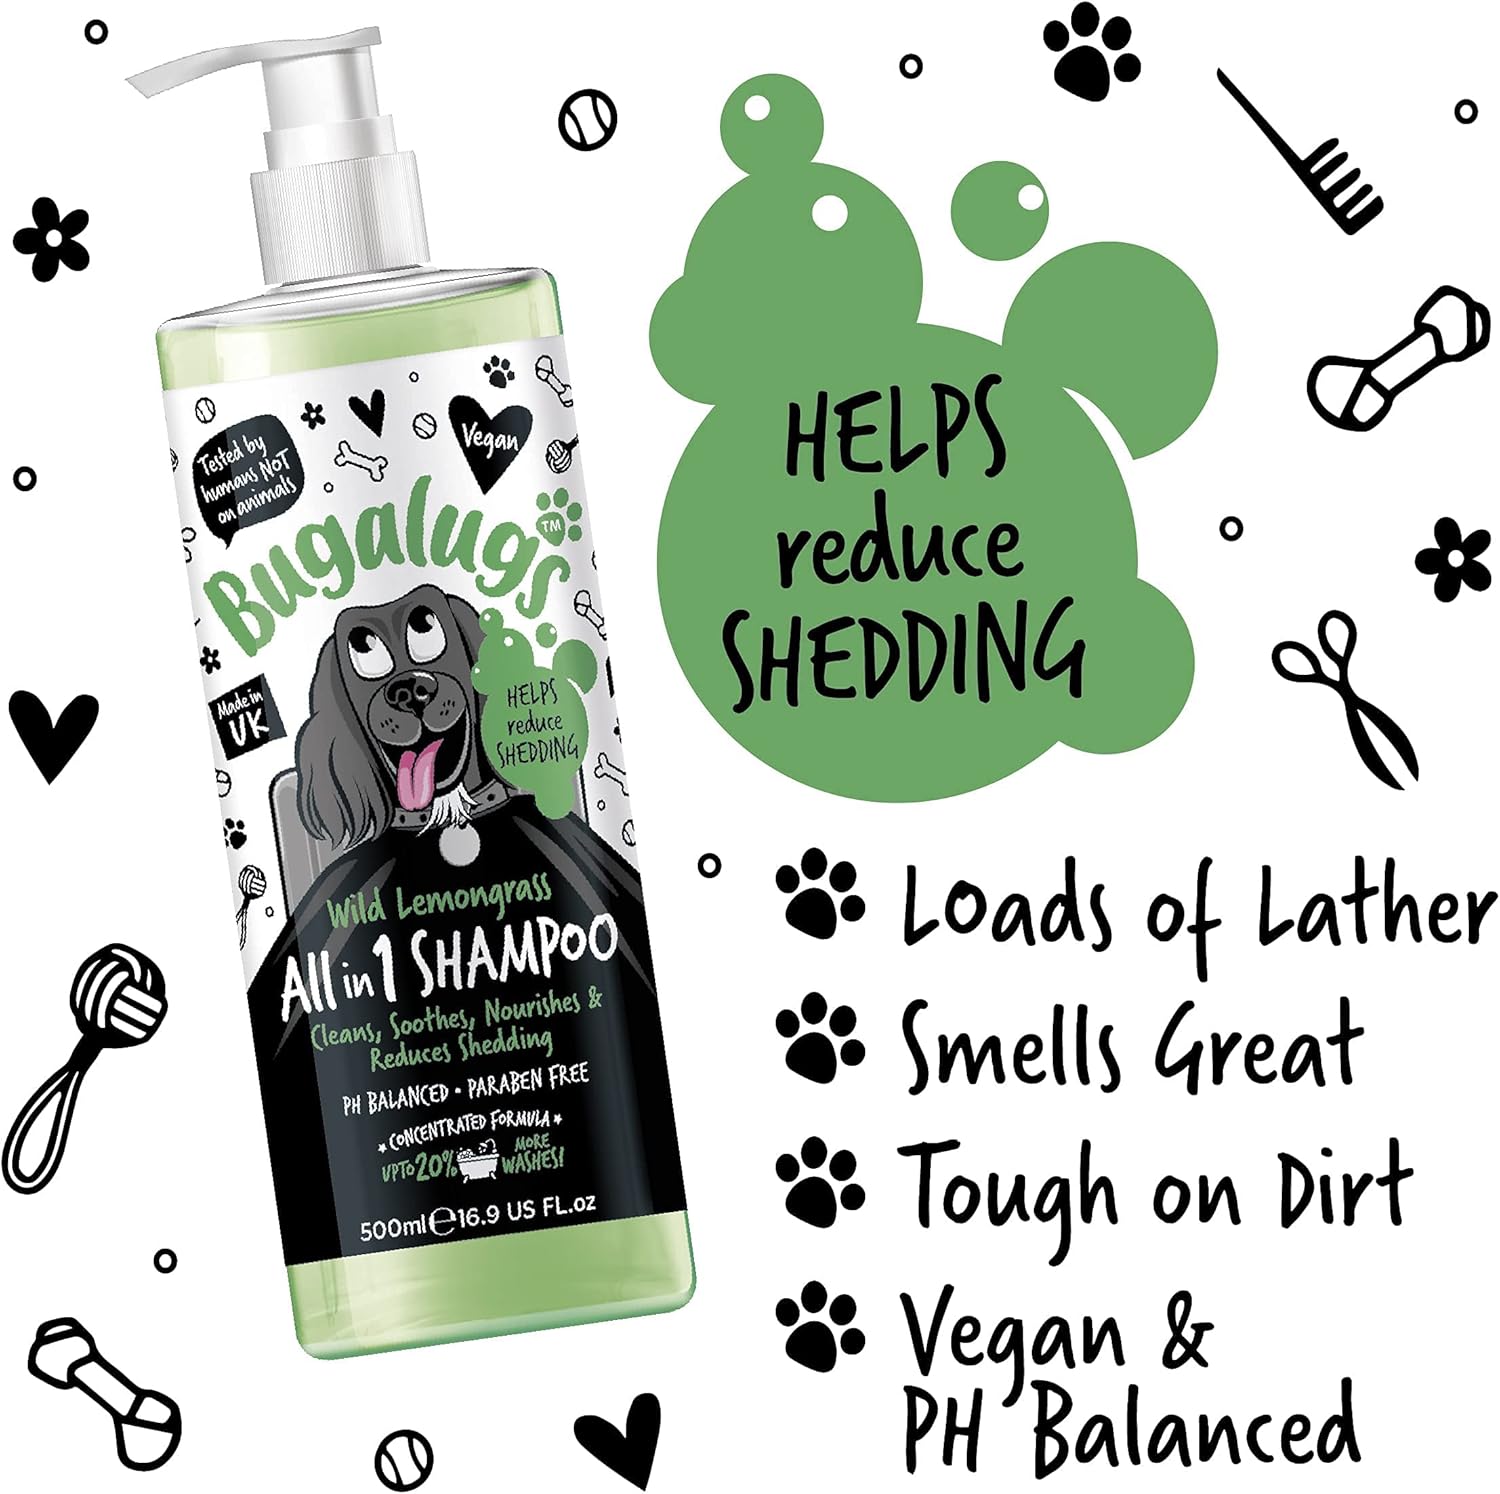 BUGALUGS Dog Shampoo All in 1 shampoo & conditioner dog grooming products for smelly dogs with Apple & Vanila fragrance, best vegan pet puppy shampoo, professional groom :Pet Supplies